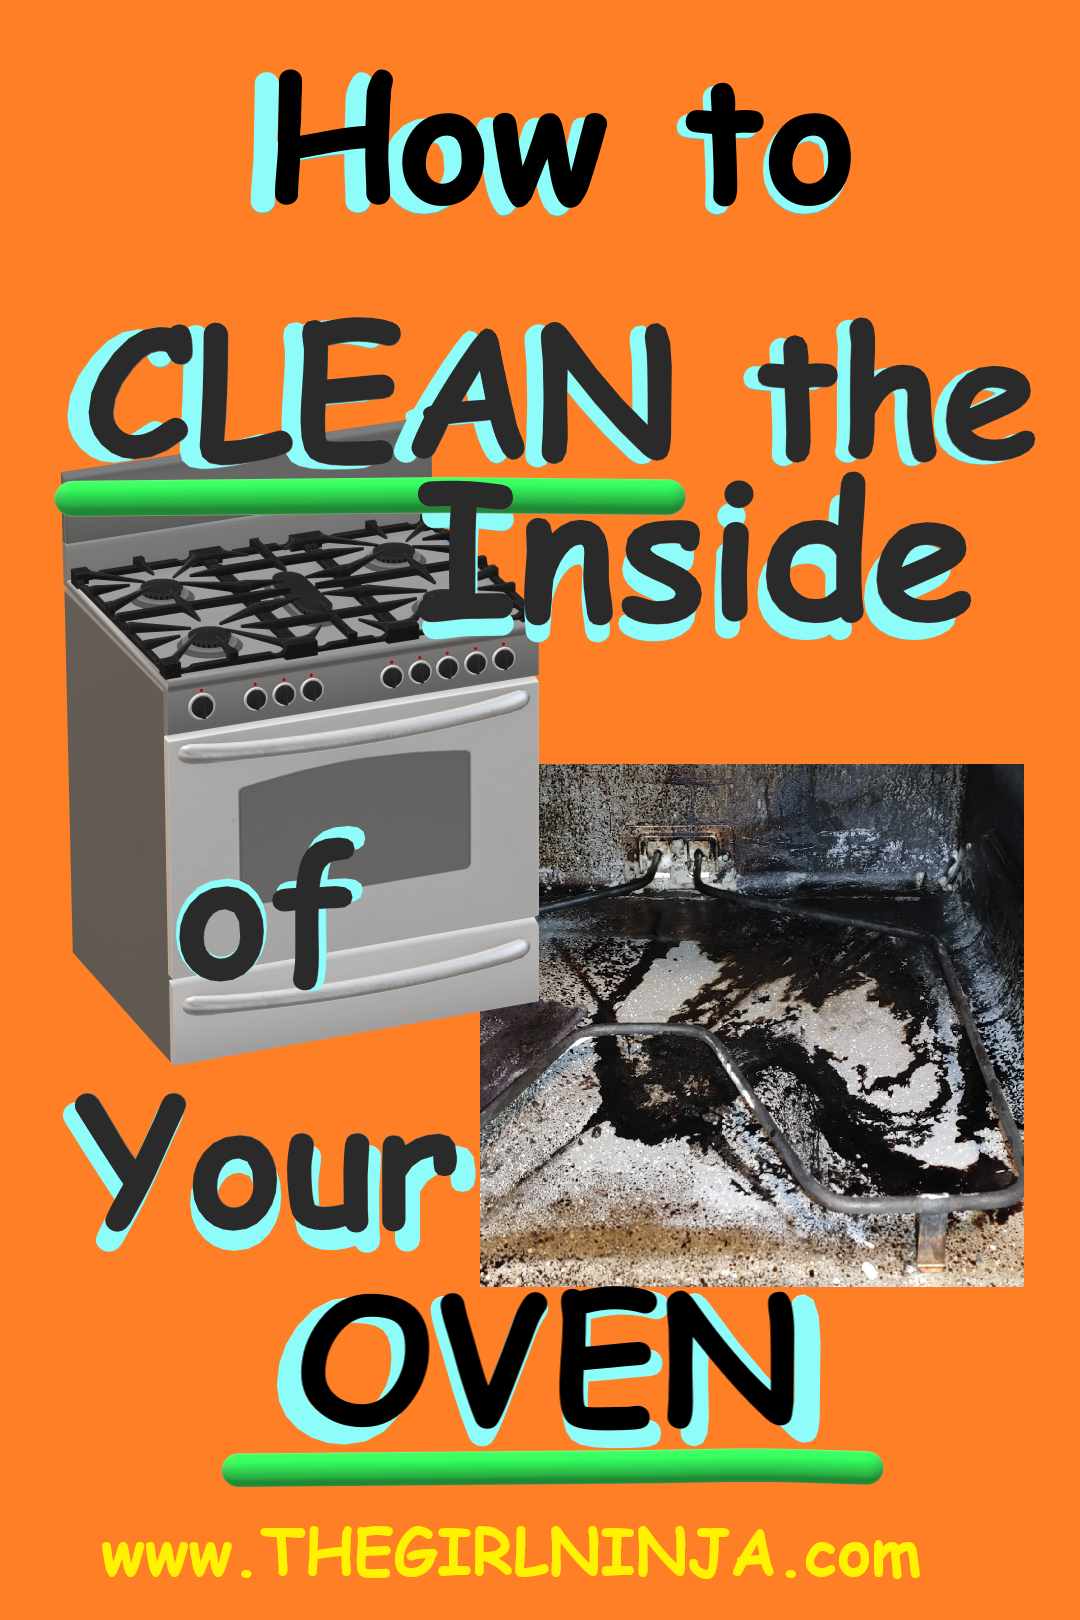 Orange rectangle with black text that has a blue shadow reads How to CLEAN the Inside of Your OVEN. Text is laid over images of a closed oven and a close up a the inside of of an oven. Yellow text at bottom center reads www.THEGIRLNINJA.com